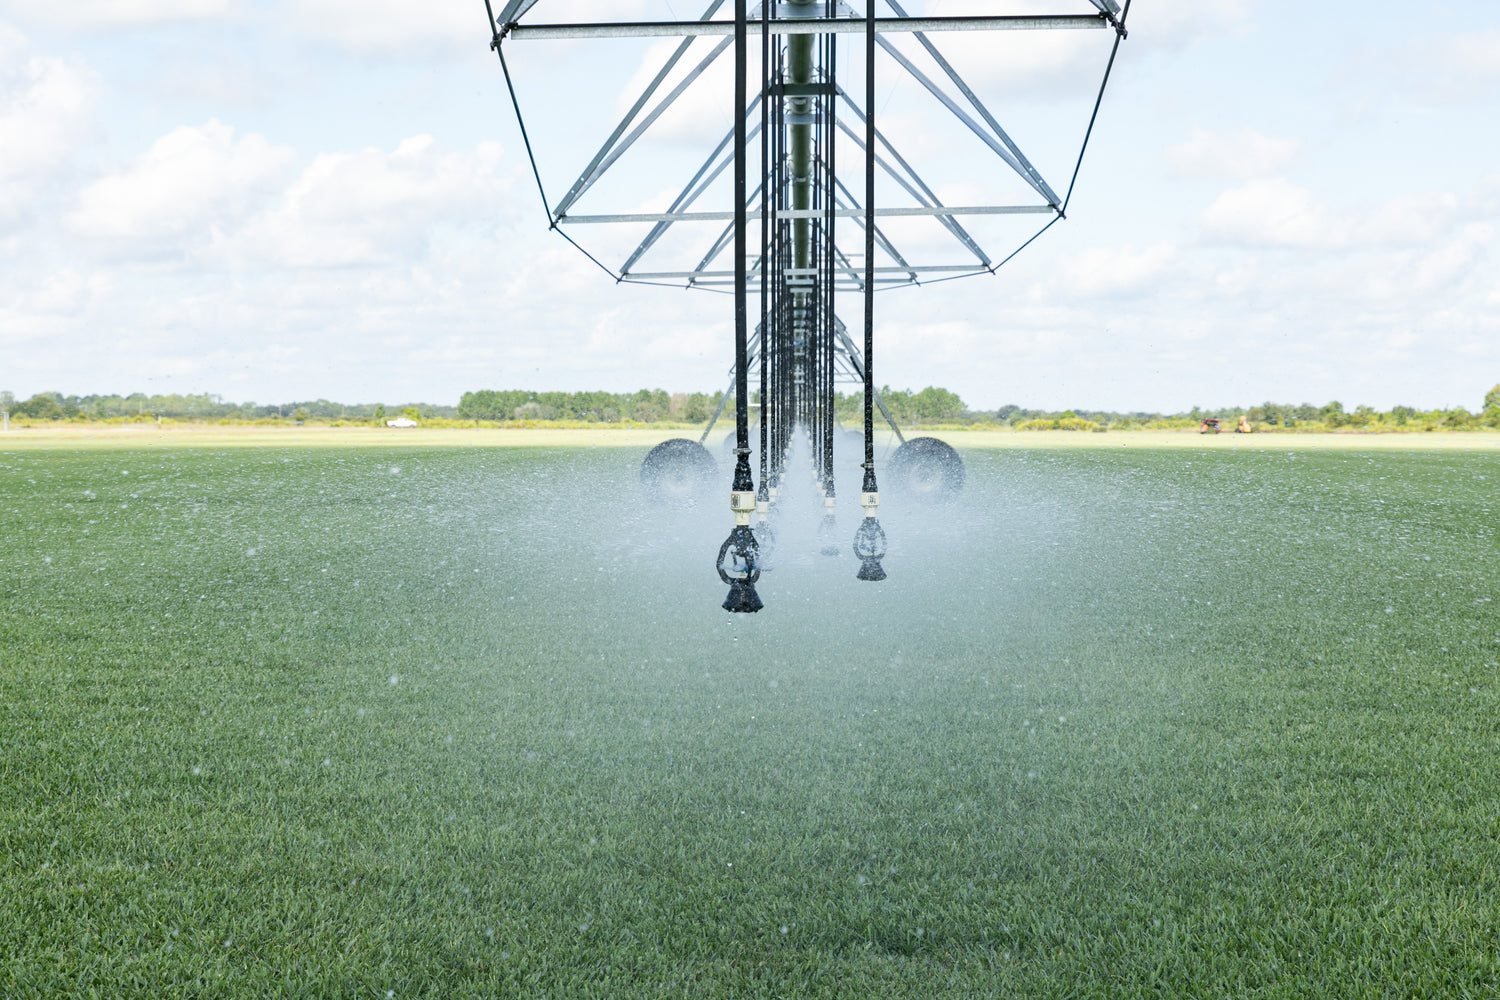 <p>We save on water through our irrigation systems. Our system allows us to flow the water underground, which saves tremendous amounts of water waste. An open irrigation system wastes 30%-40% more water than our underground water tile system.</p>